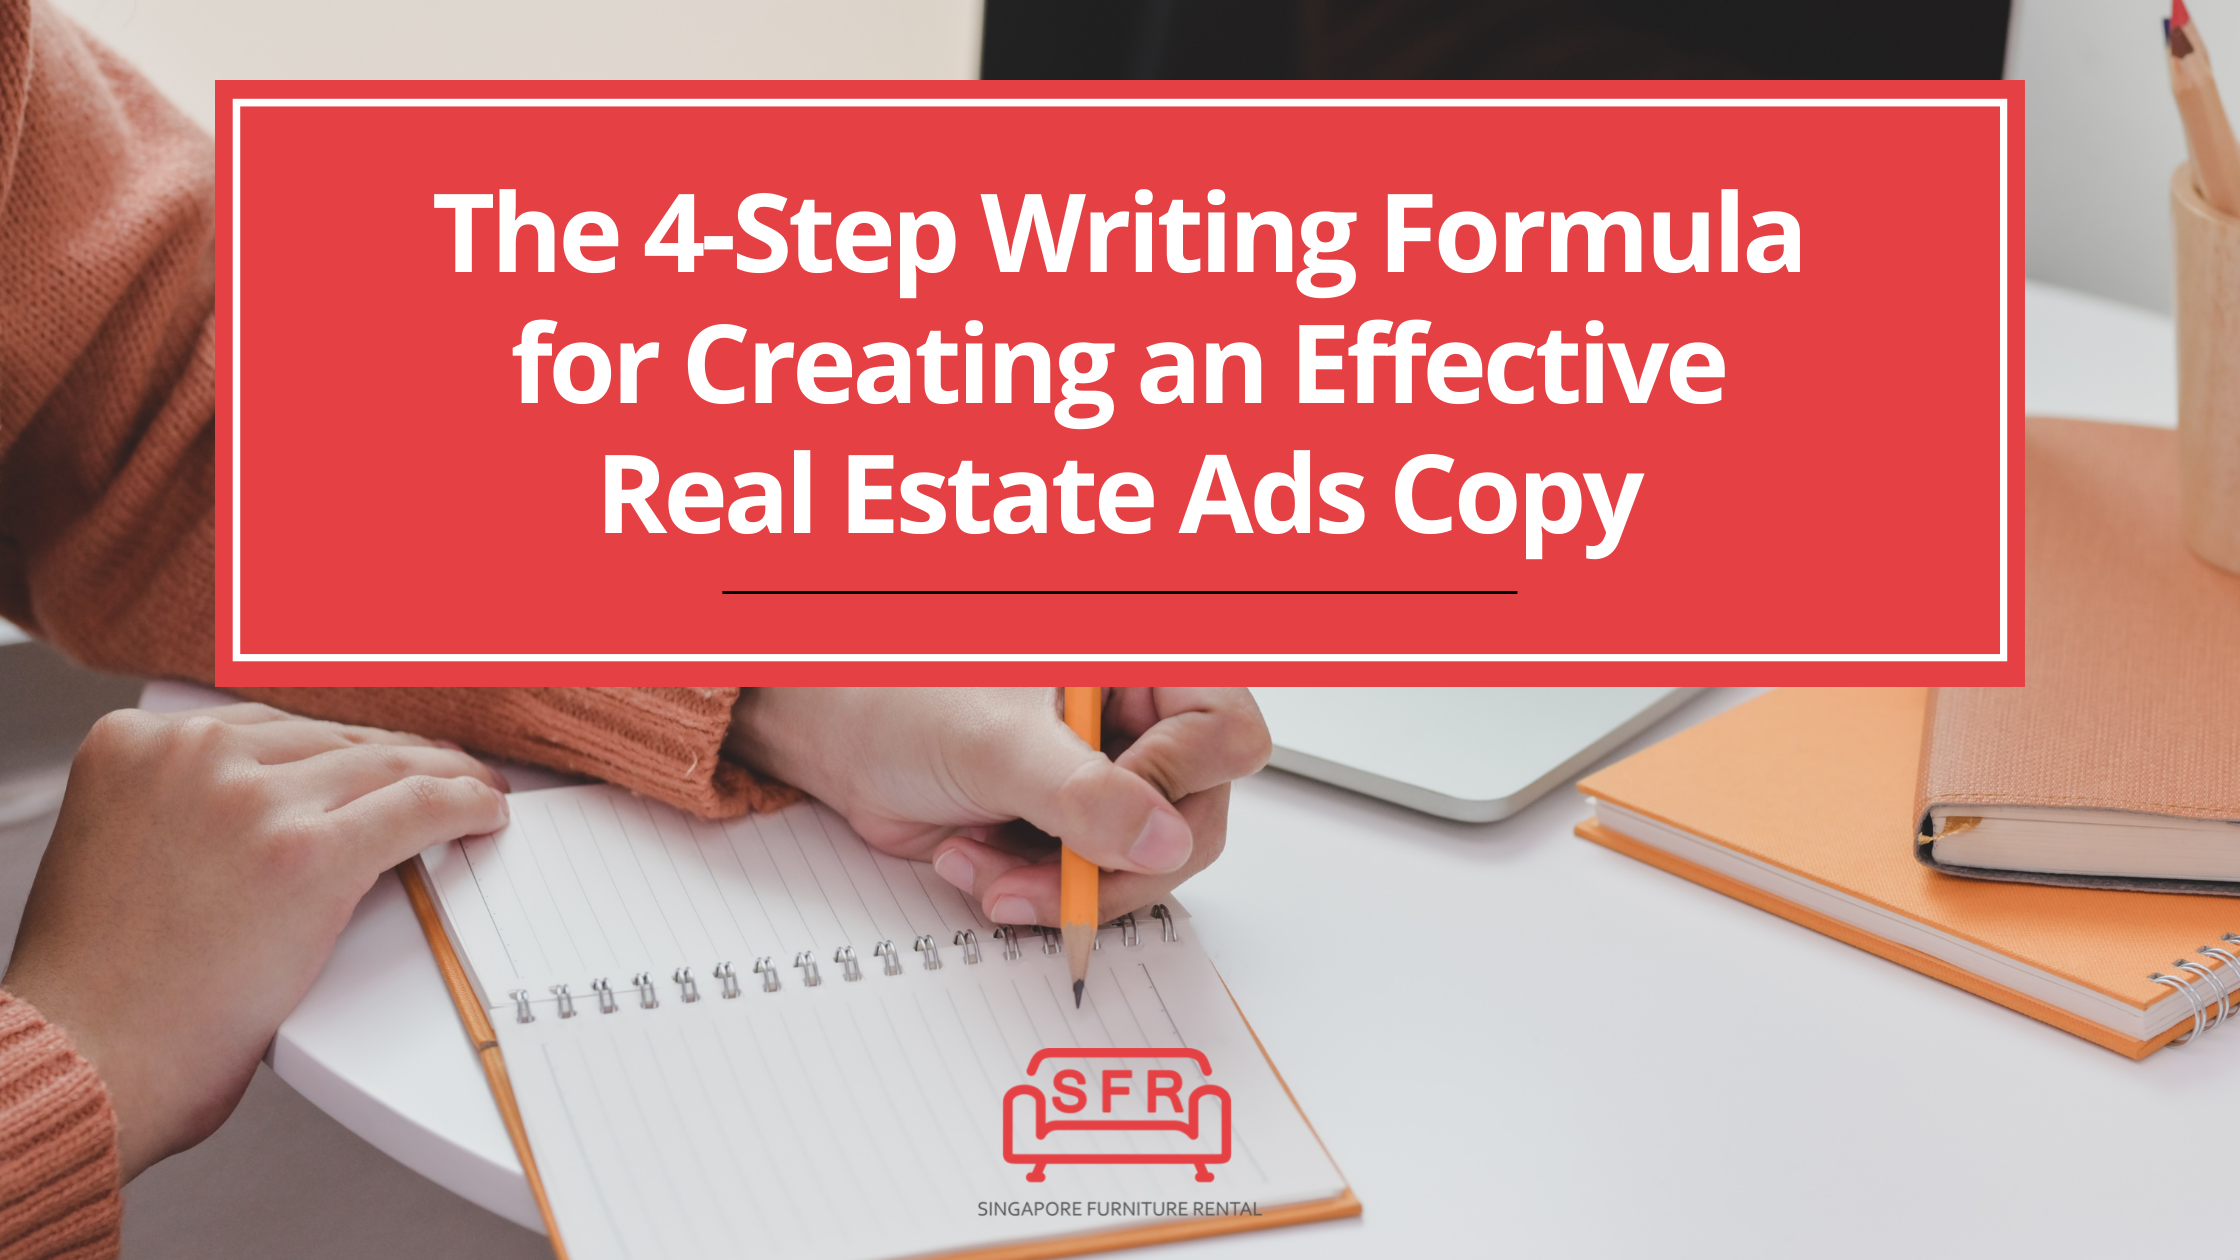 The 4-Step Writing Formula for Creating an Effective Real Estate Ads Copy